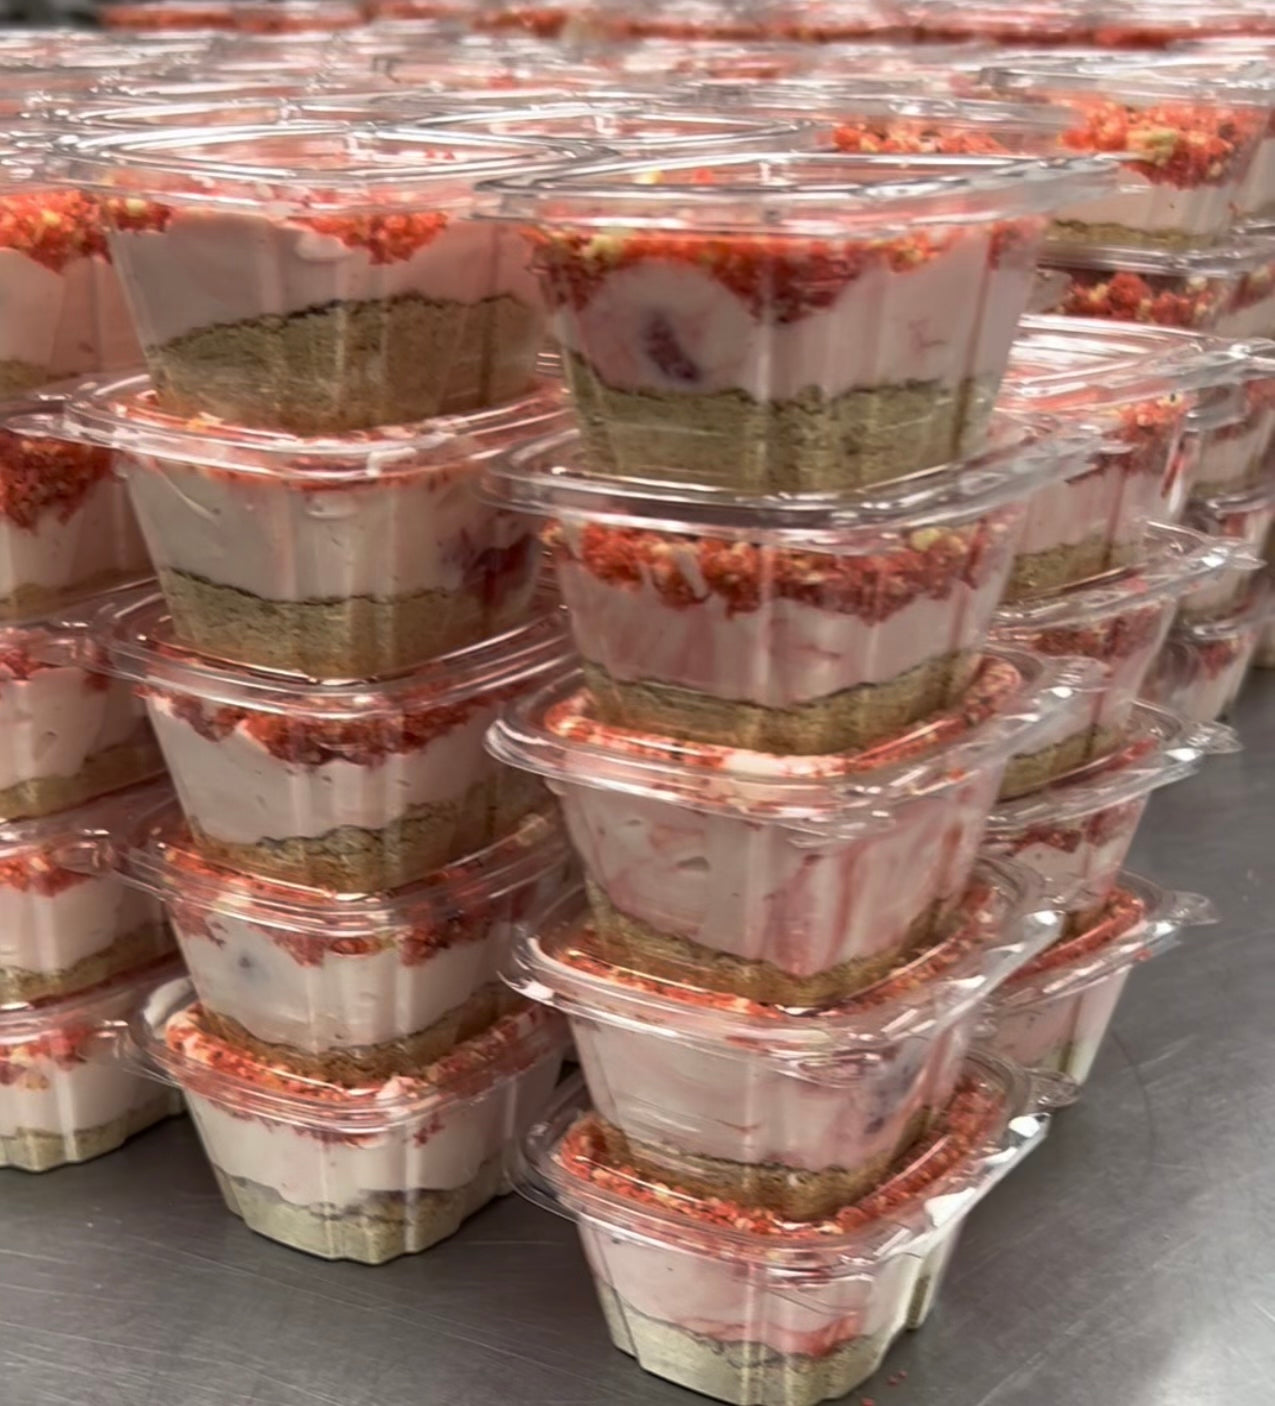 6oz Cheesecake Cups - Wholesale Order Only